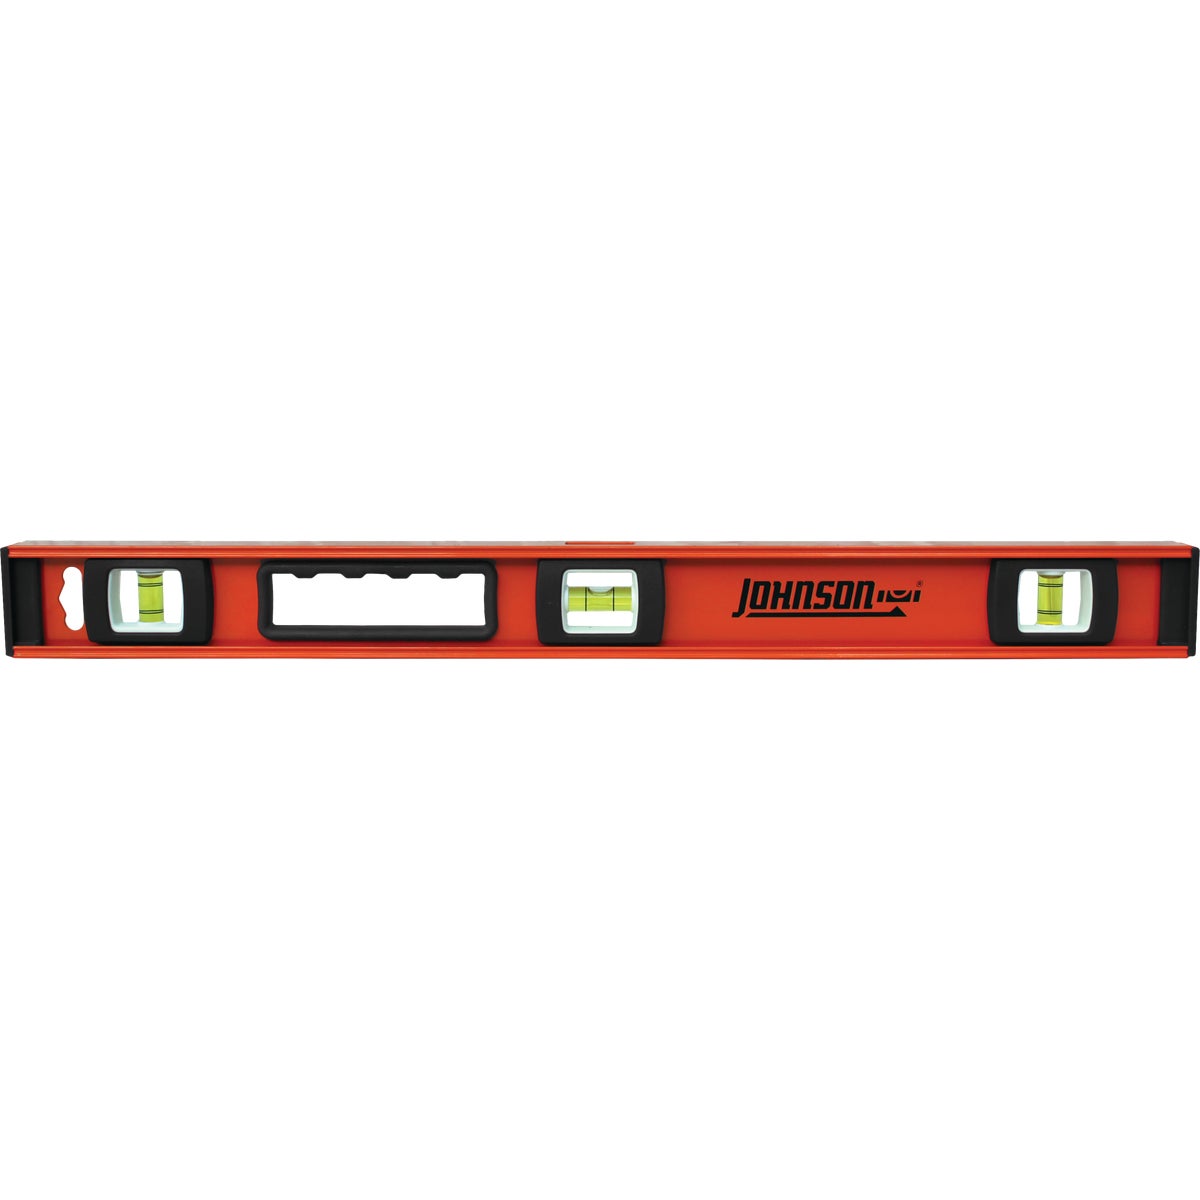 Item 365768, Heavy-duty aluminum I-Beam level frame assures durability and accuracy and 